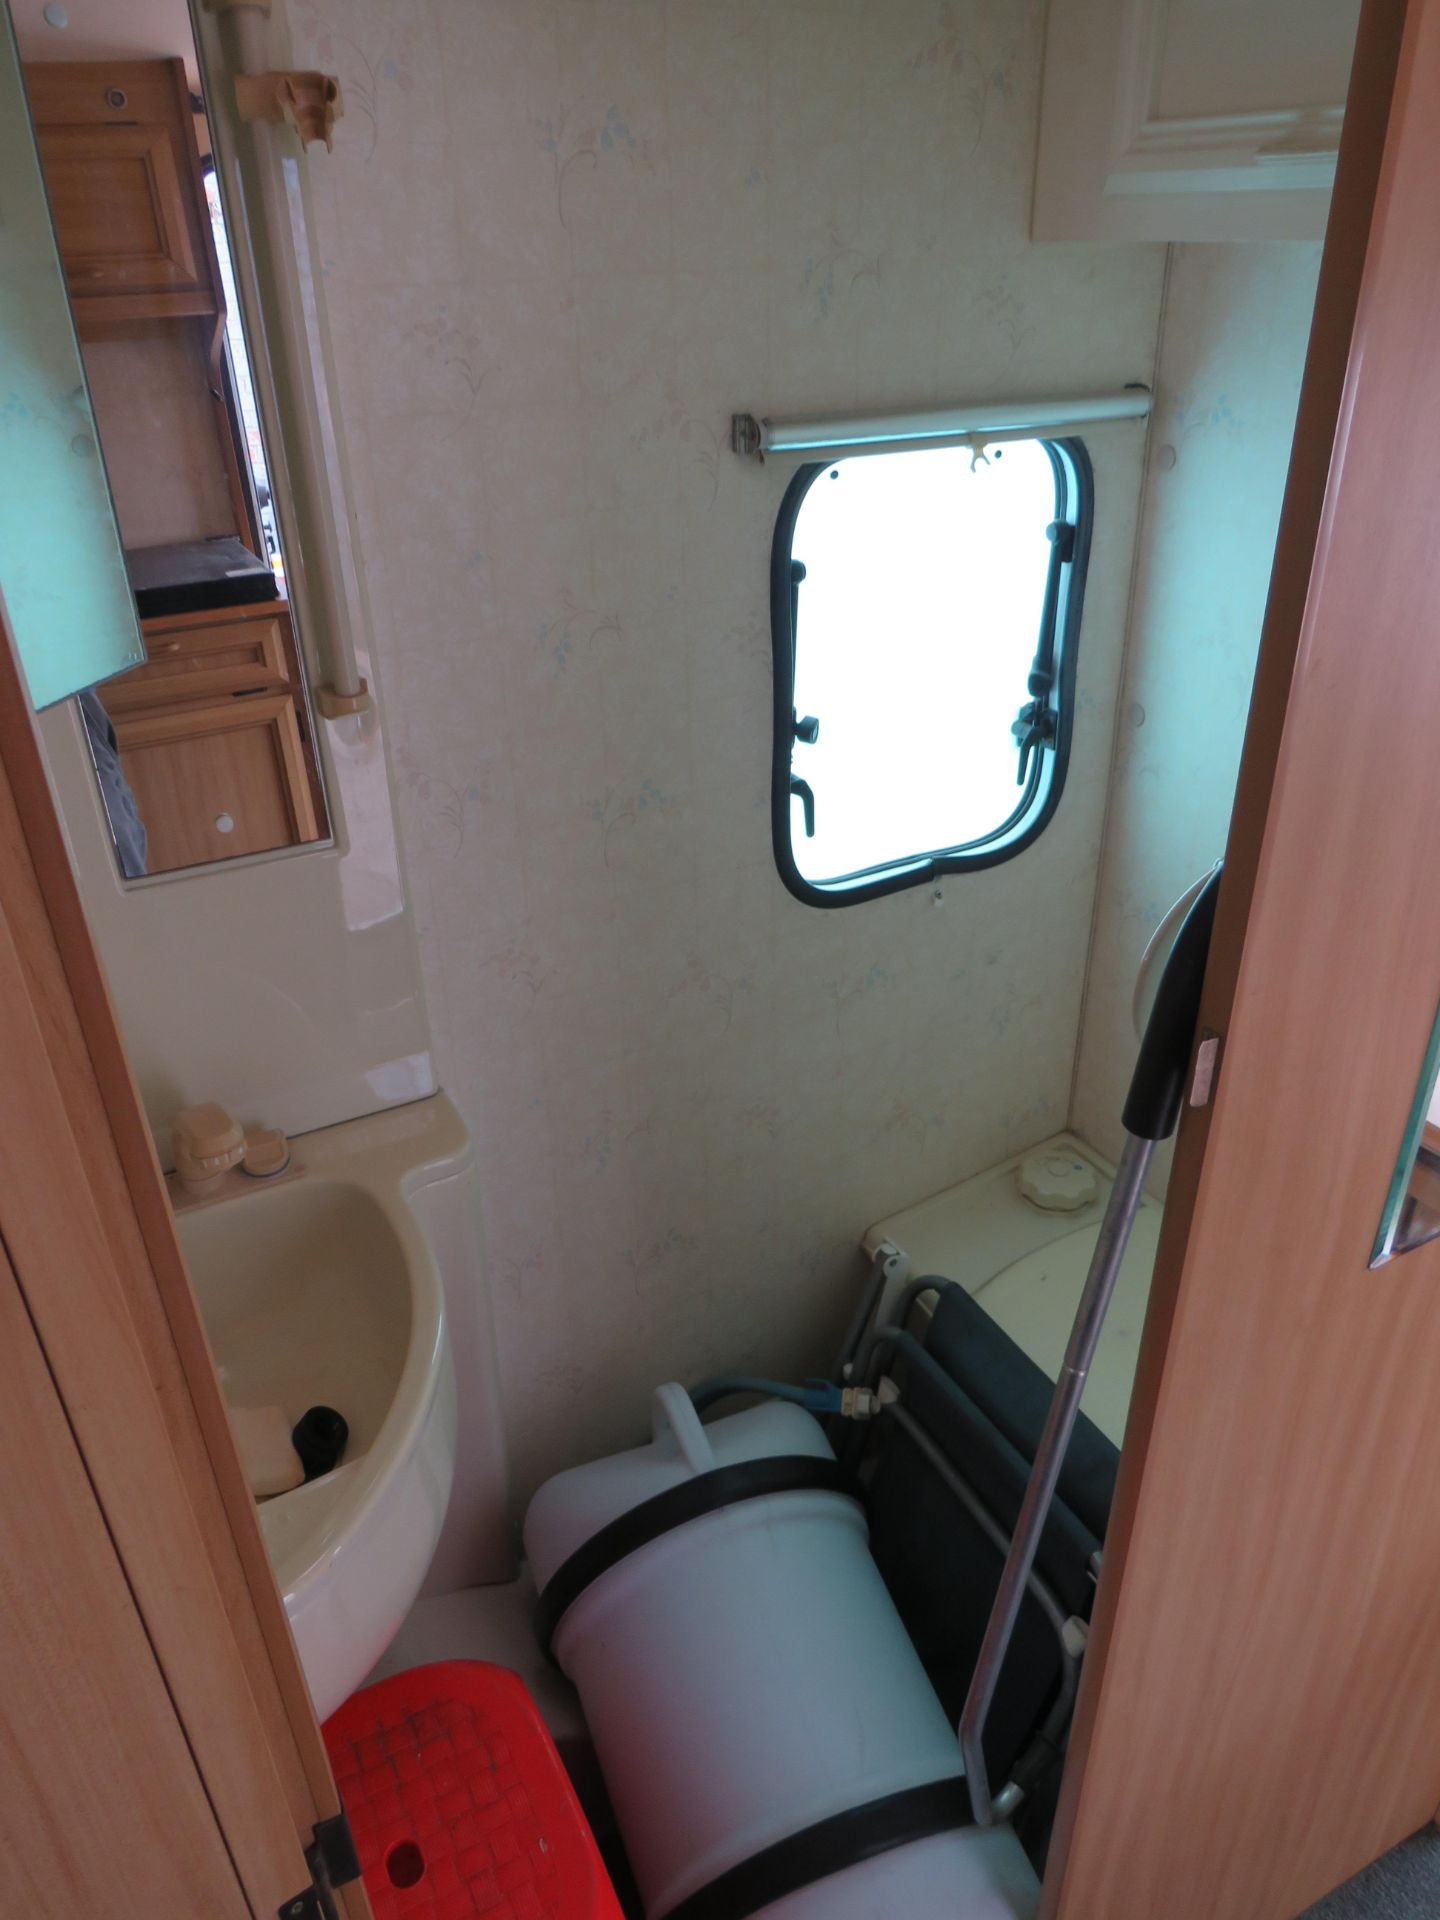 Eldis Pamperos XL 4 berth Caravan with self mover and Awning, the seller has informed us that the - Image 13 of 19